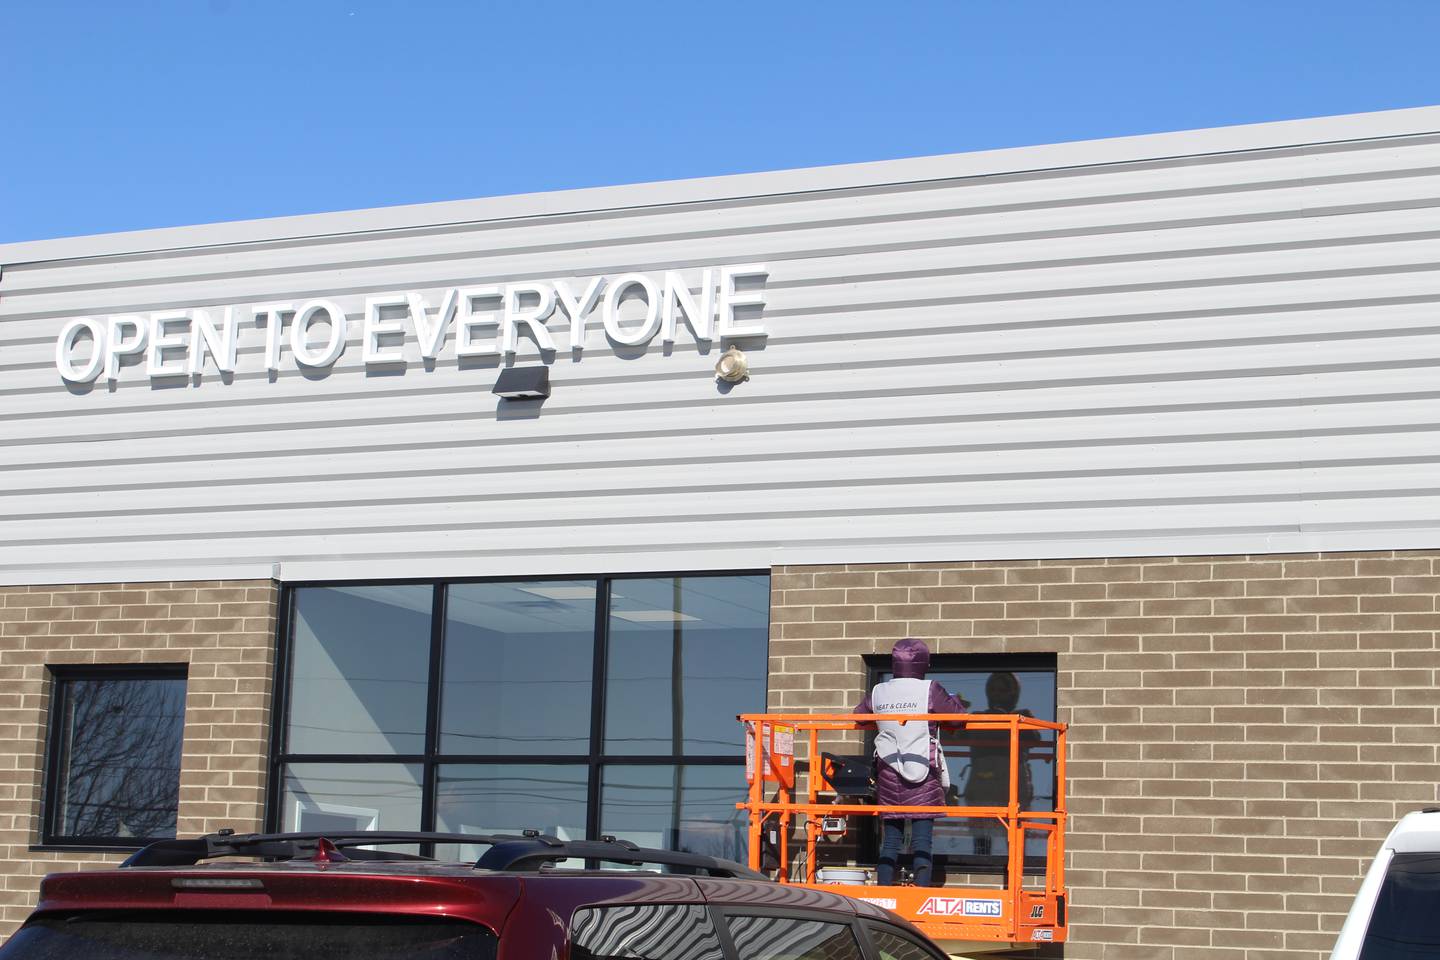 Workers complete finishing touches on the exterior of The Food Shed Co-Op in Woodstock which expects to open this spring.